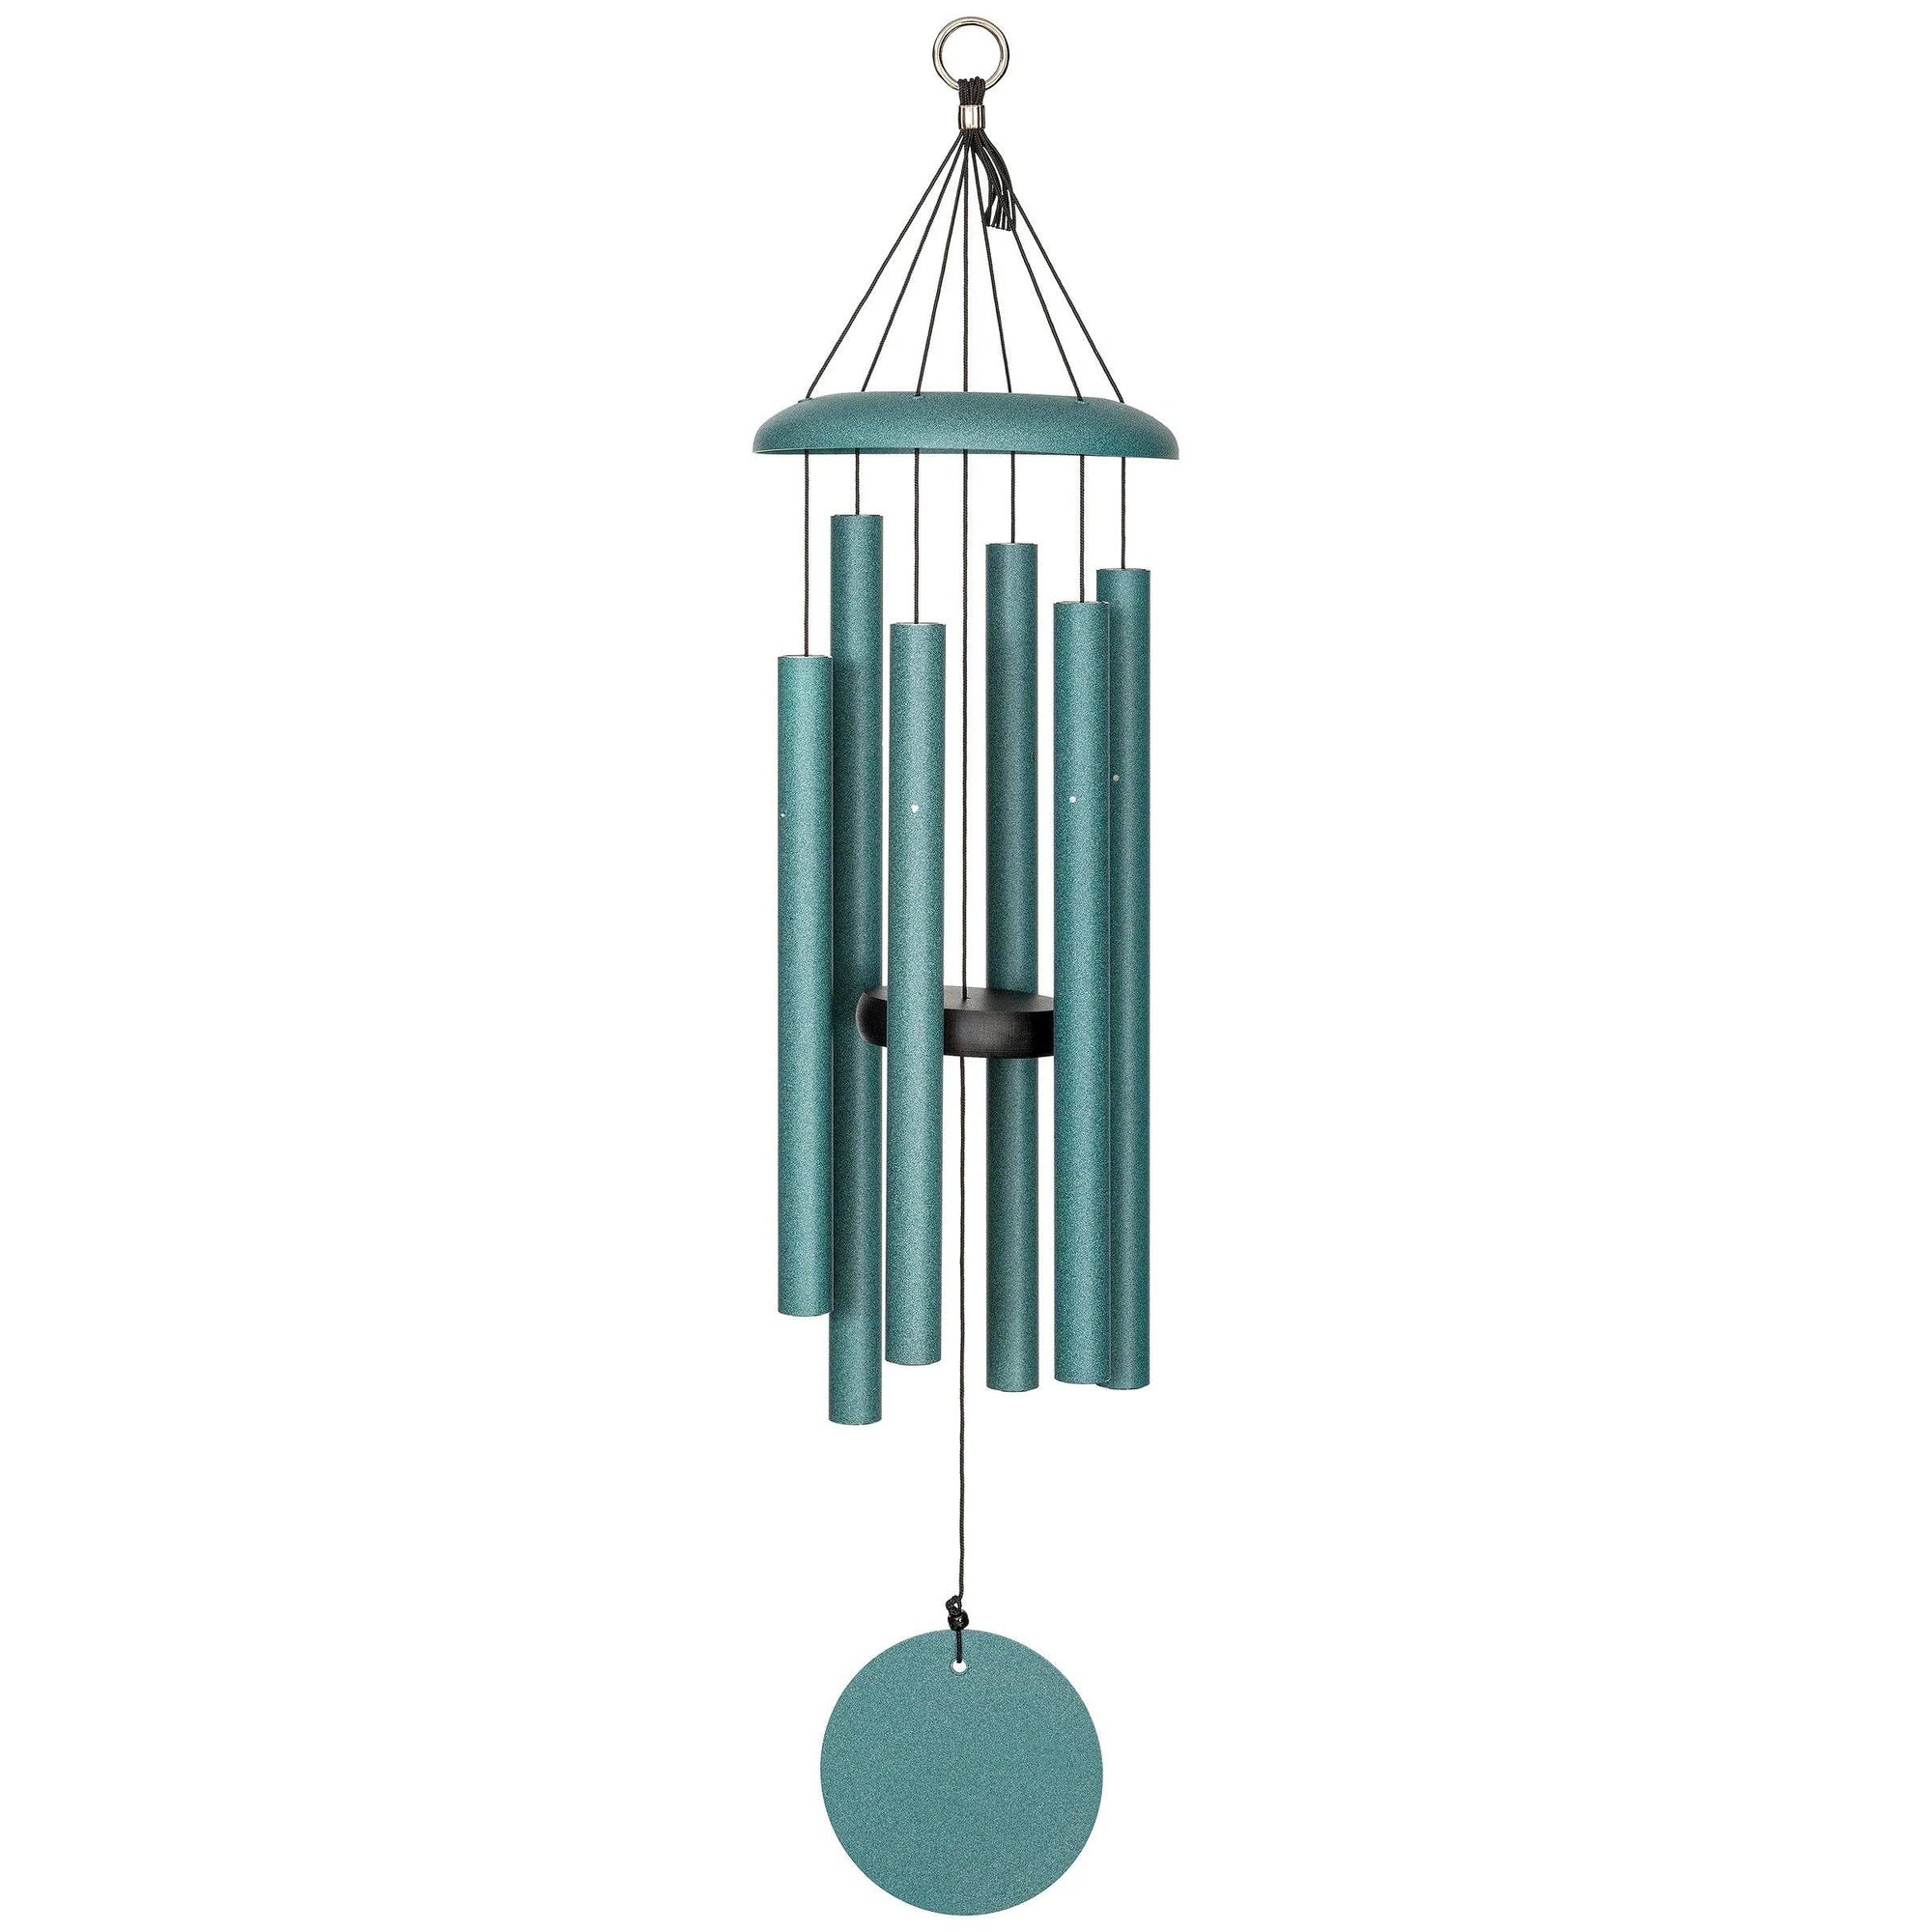 A Corinthian Bells® 30-inch wind chime hanging on a white background, perfect for a small patio or balcony.